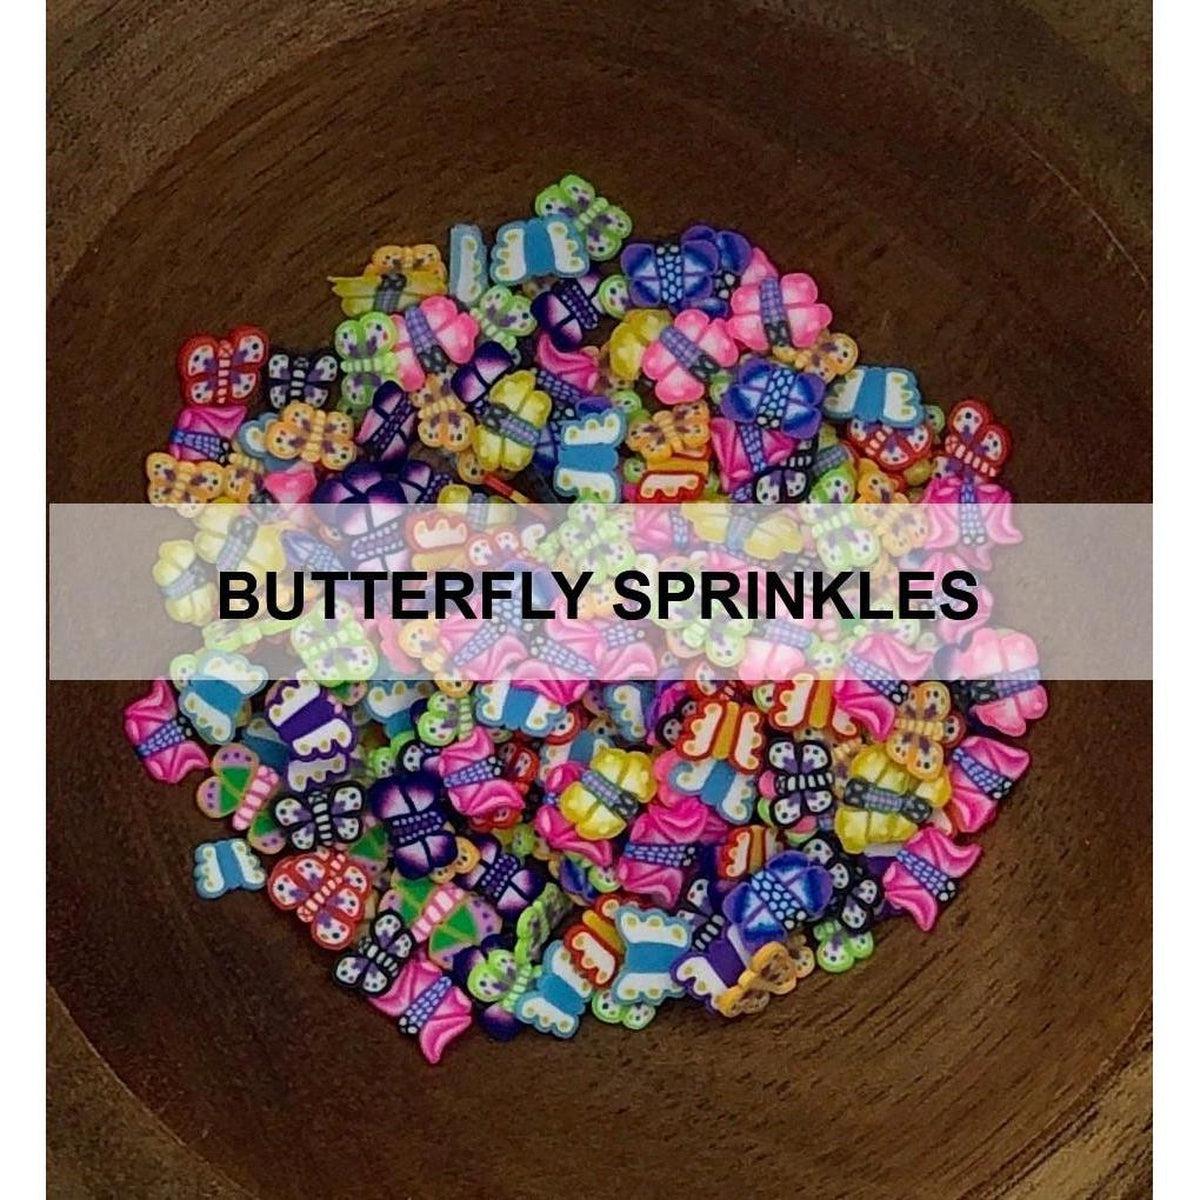 Butterfly Sprinkles by Kat Scrappiness - Kat Scrappiness